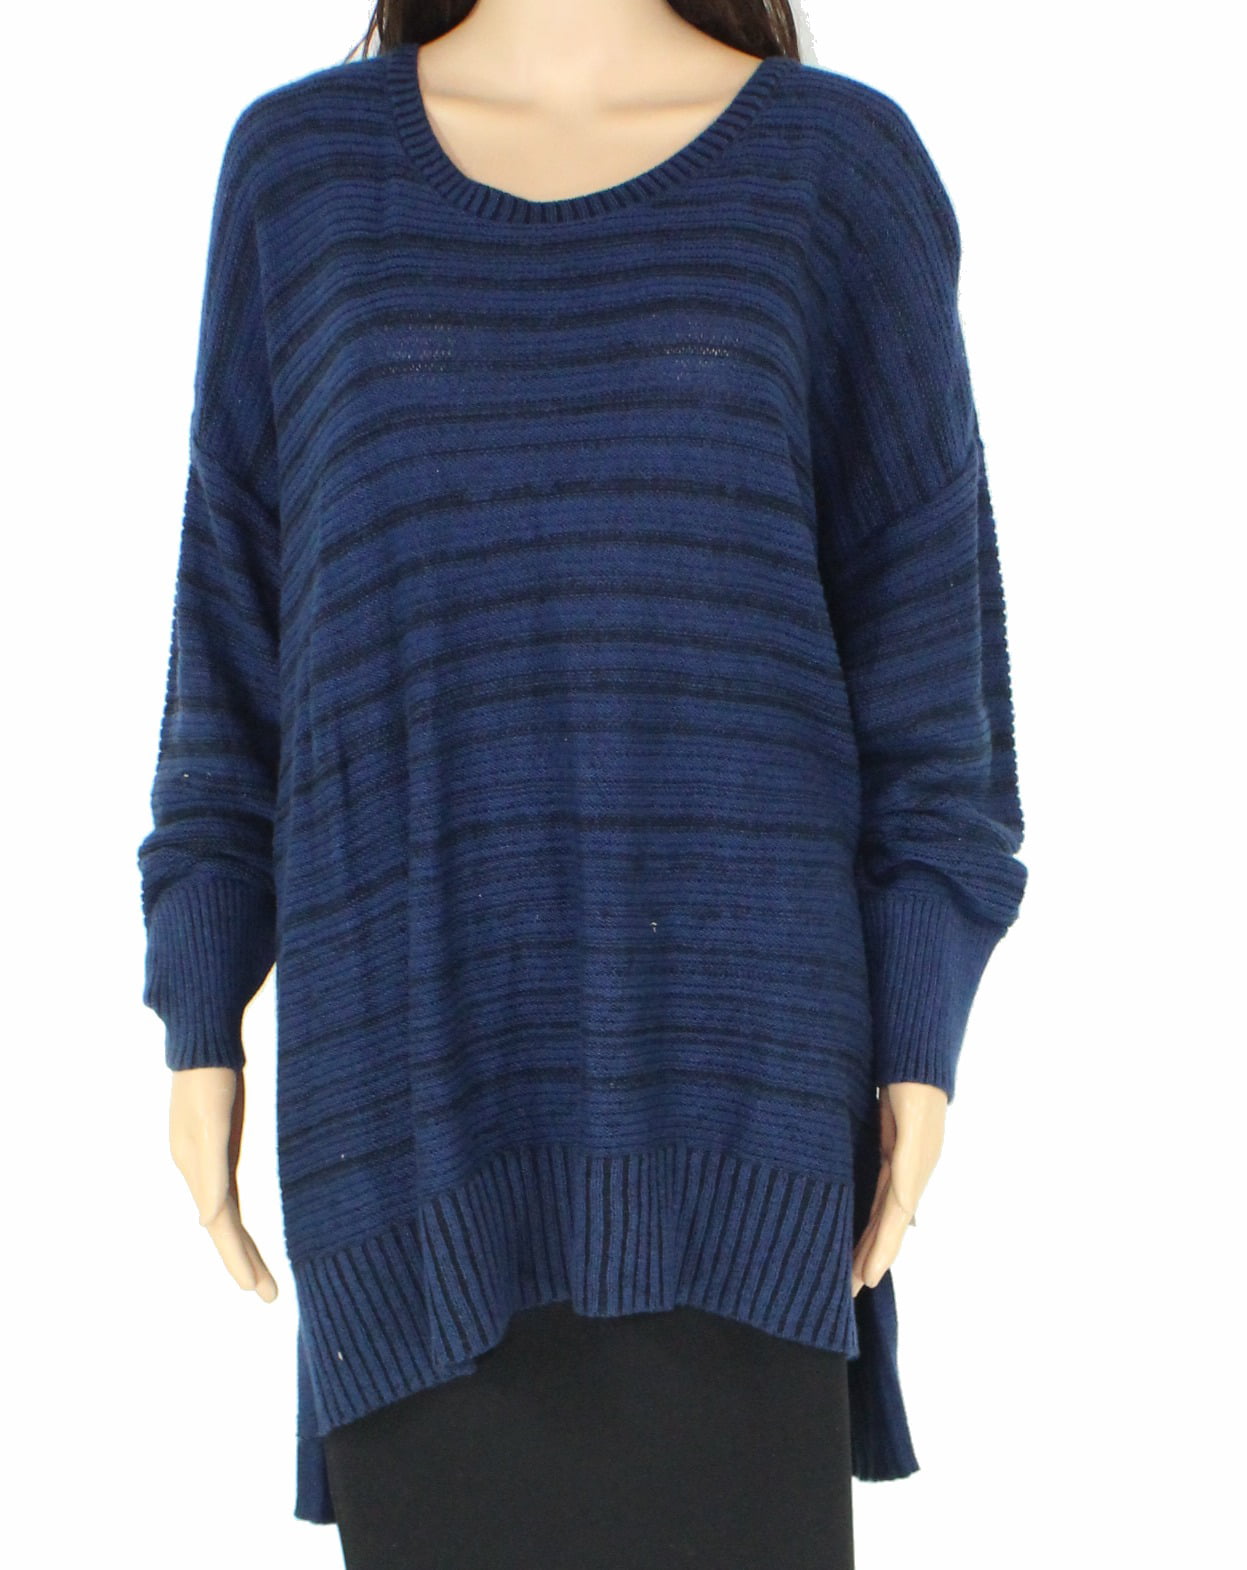 Style & Co. Sweaters - Women's Sweater Plus Pullover Scoop Neck 3X ...